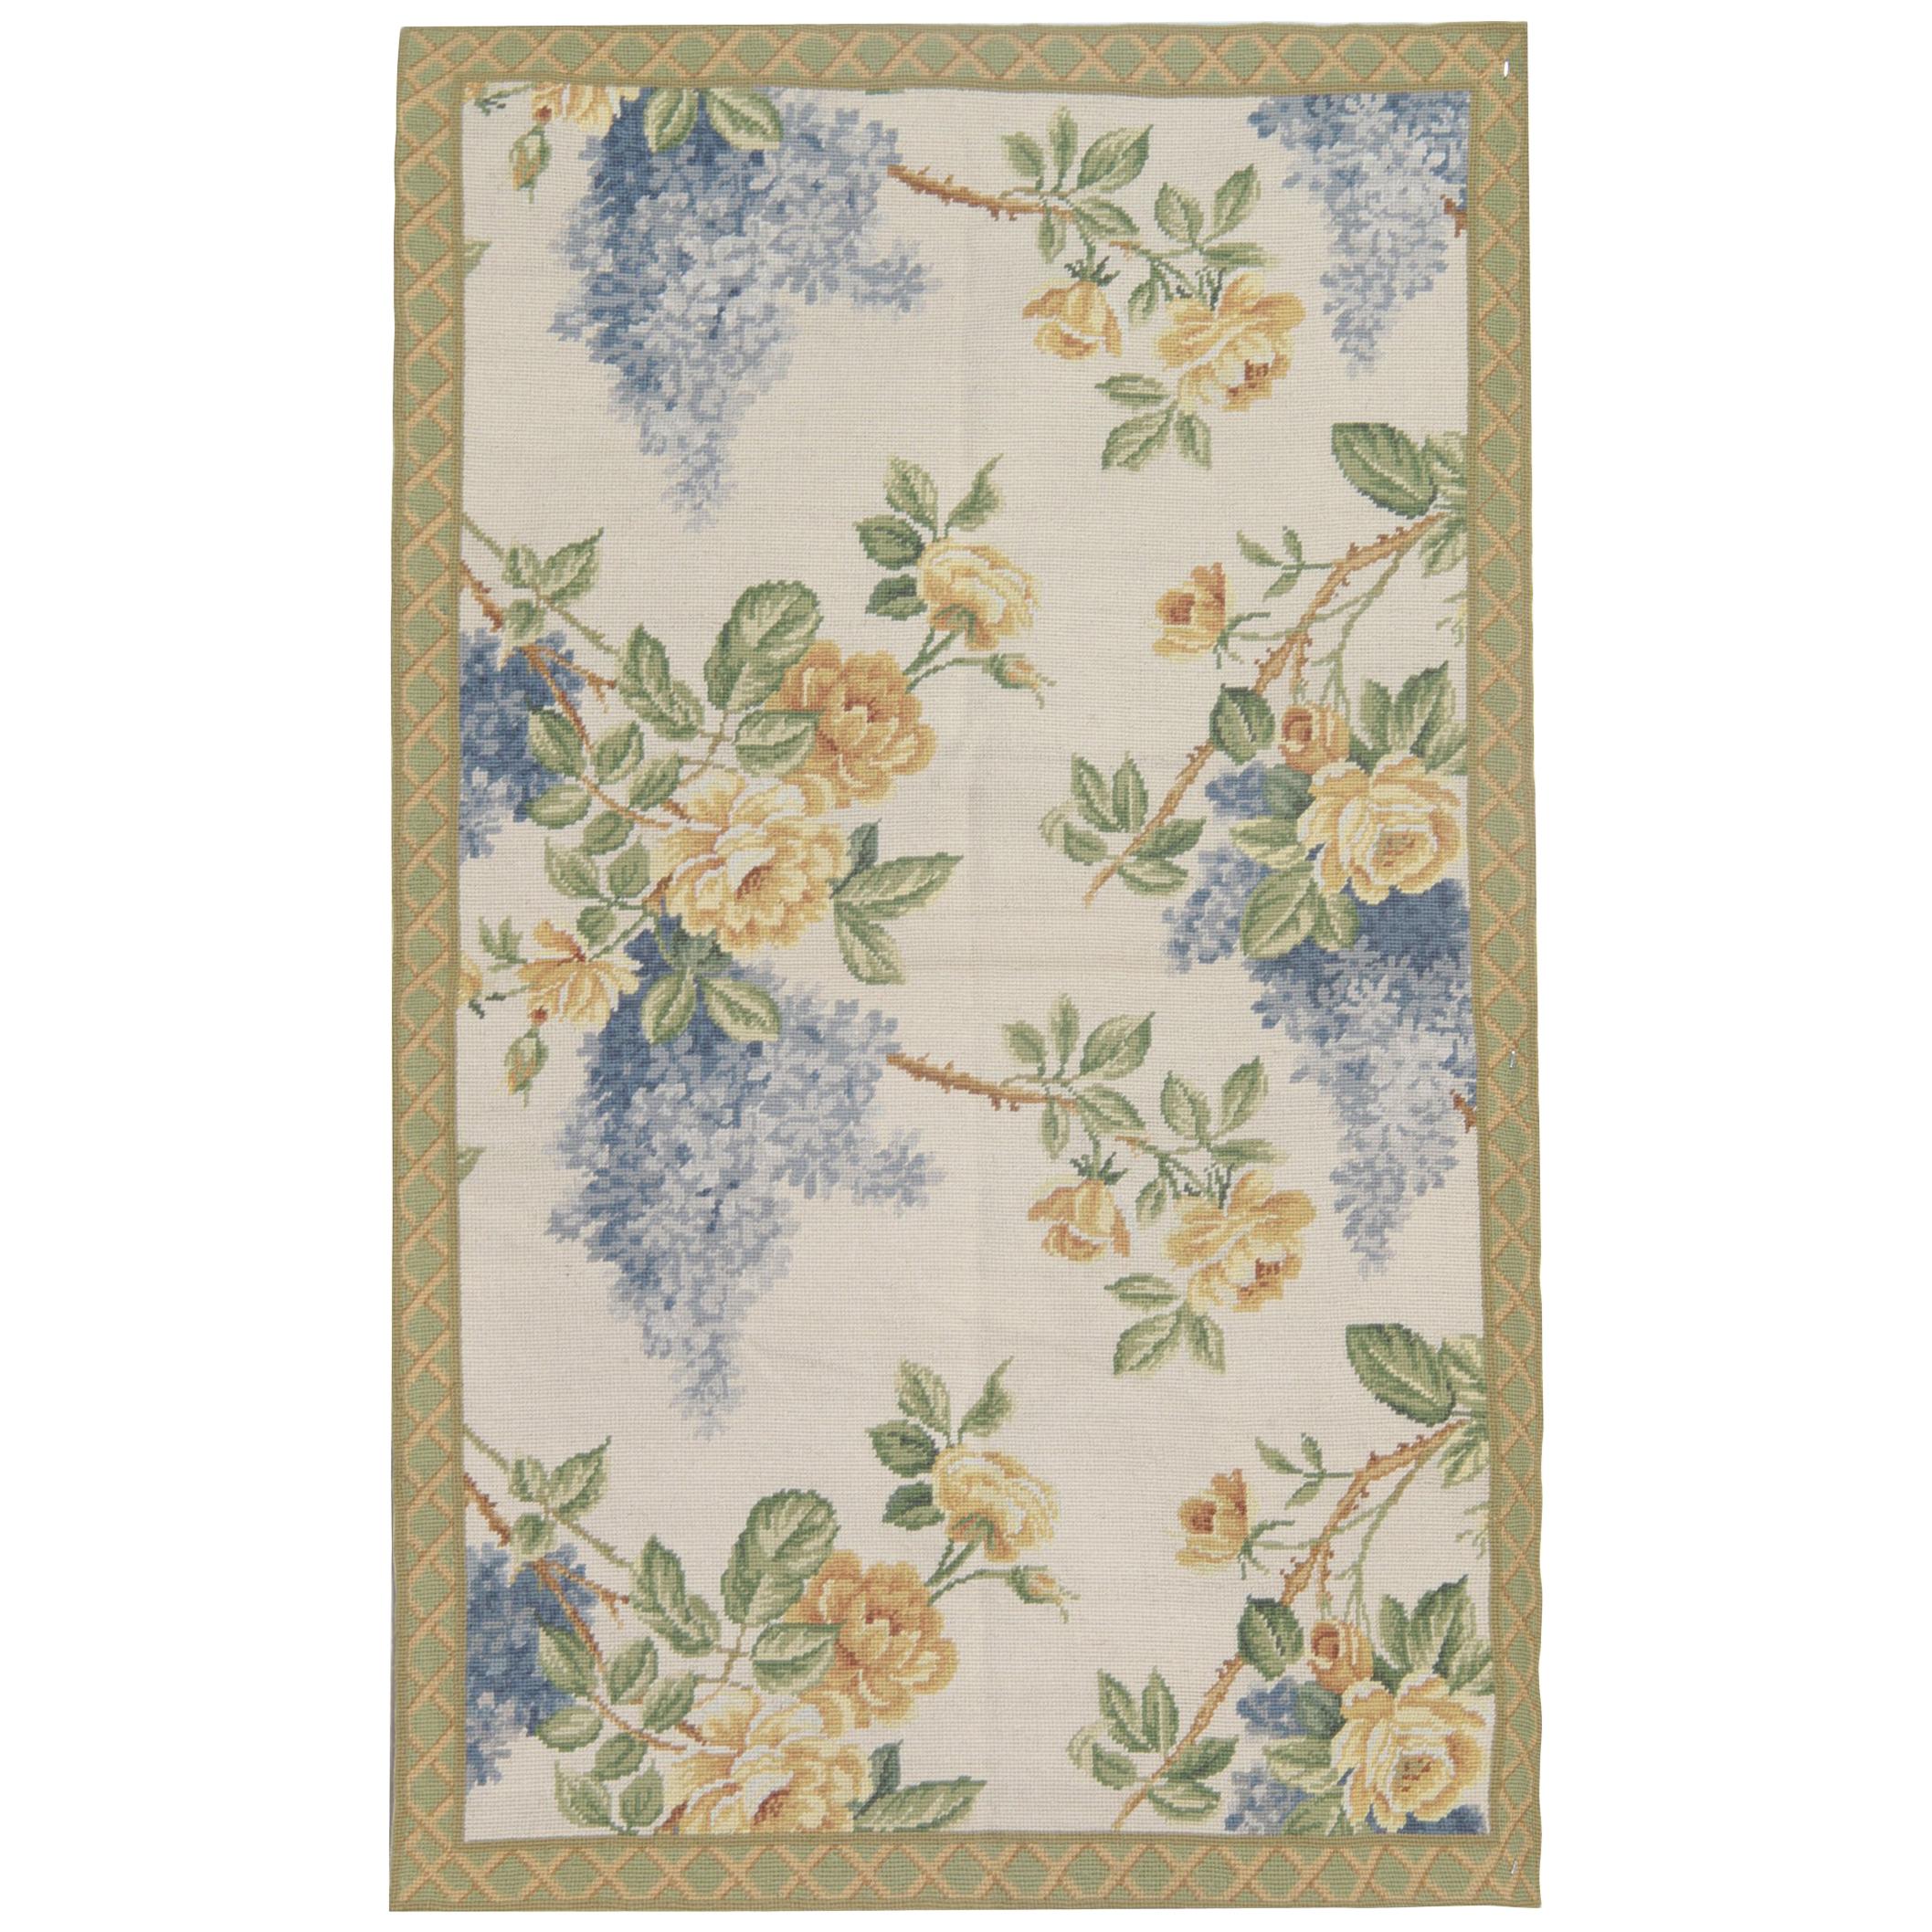 Handmade Carpet Oriental Rug, Floral Aubusson Style Rugs for Sale